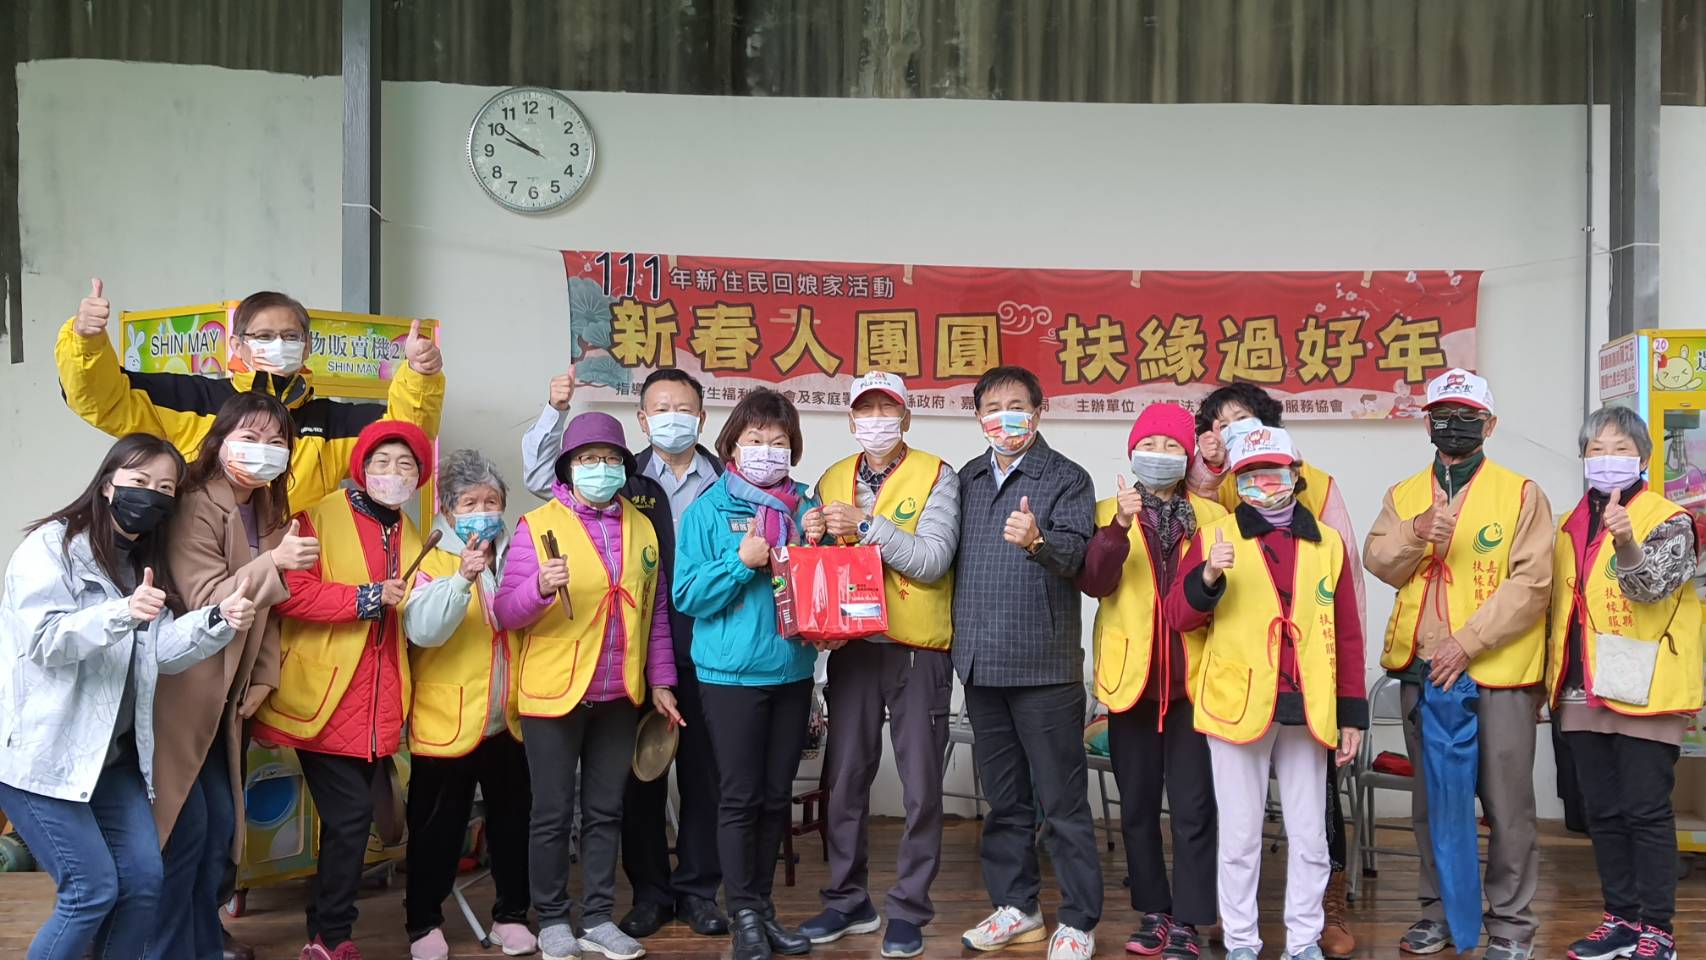 A group photo was taken at the event. (Photo / Provided by Chiayi County Service Station)